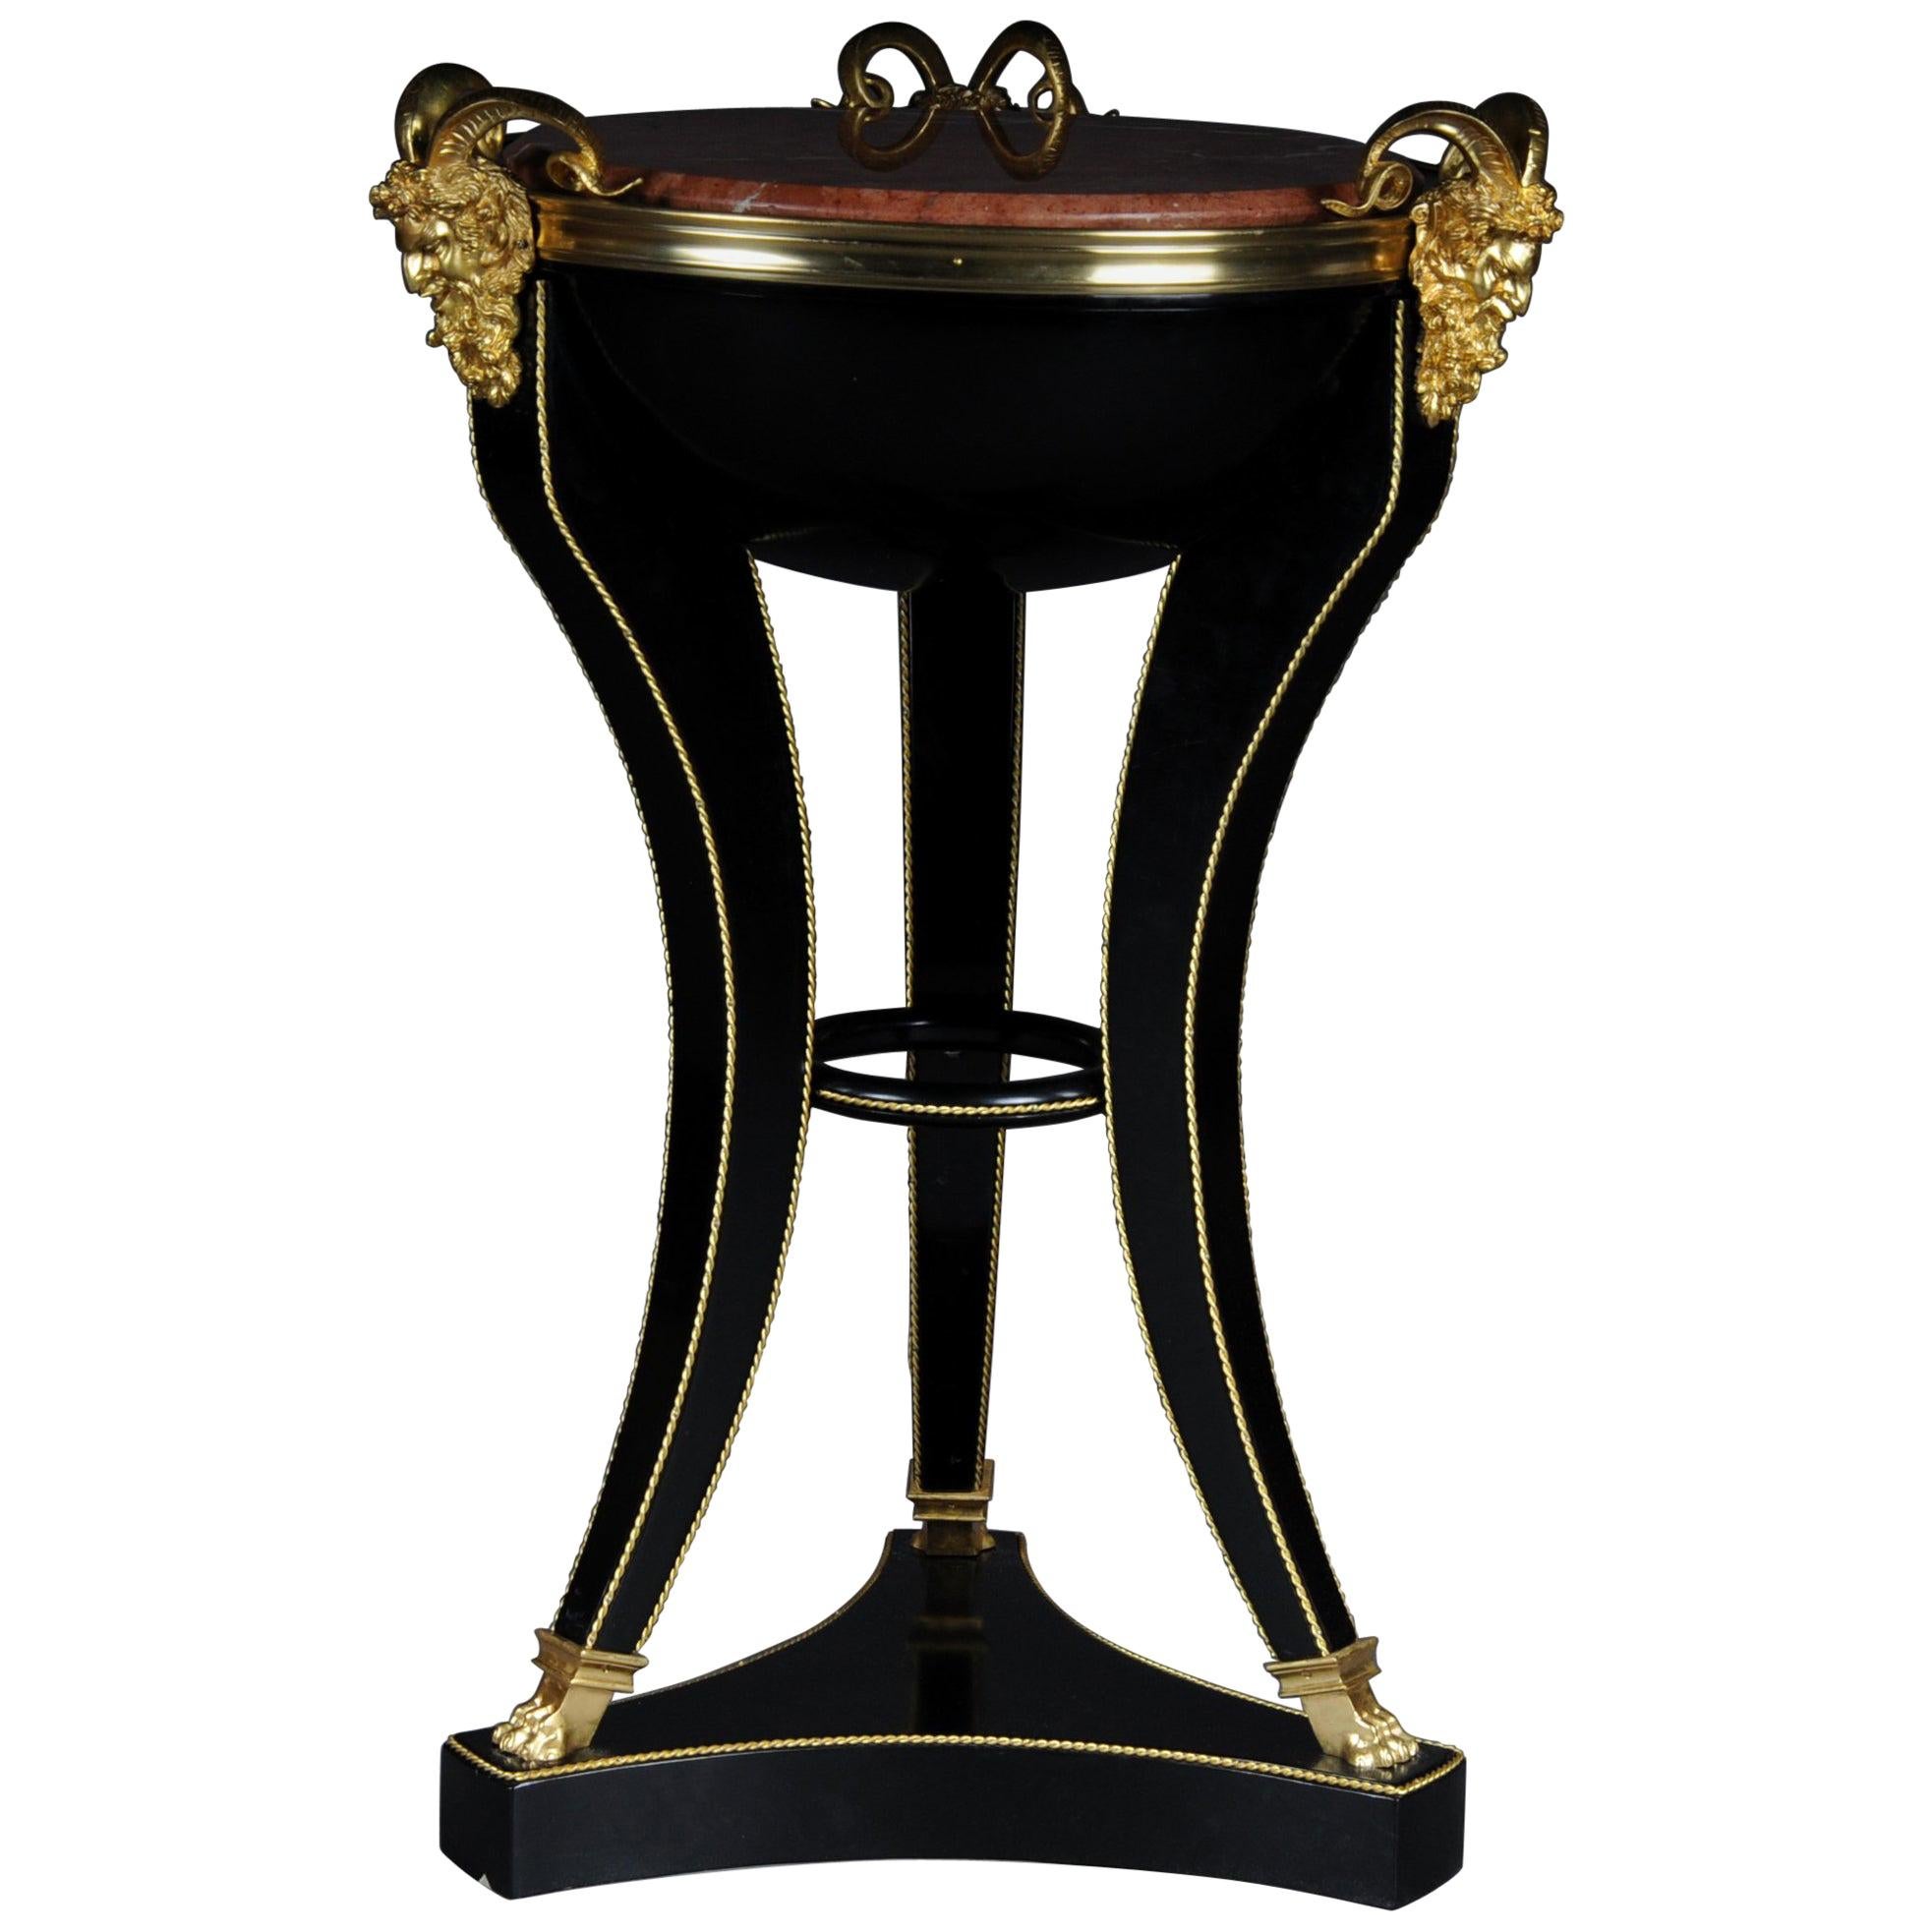 Unique Ebonized Side Table or Pillar in the Empire Style For Sale